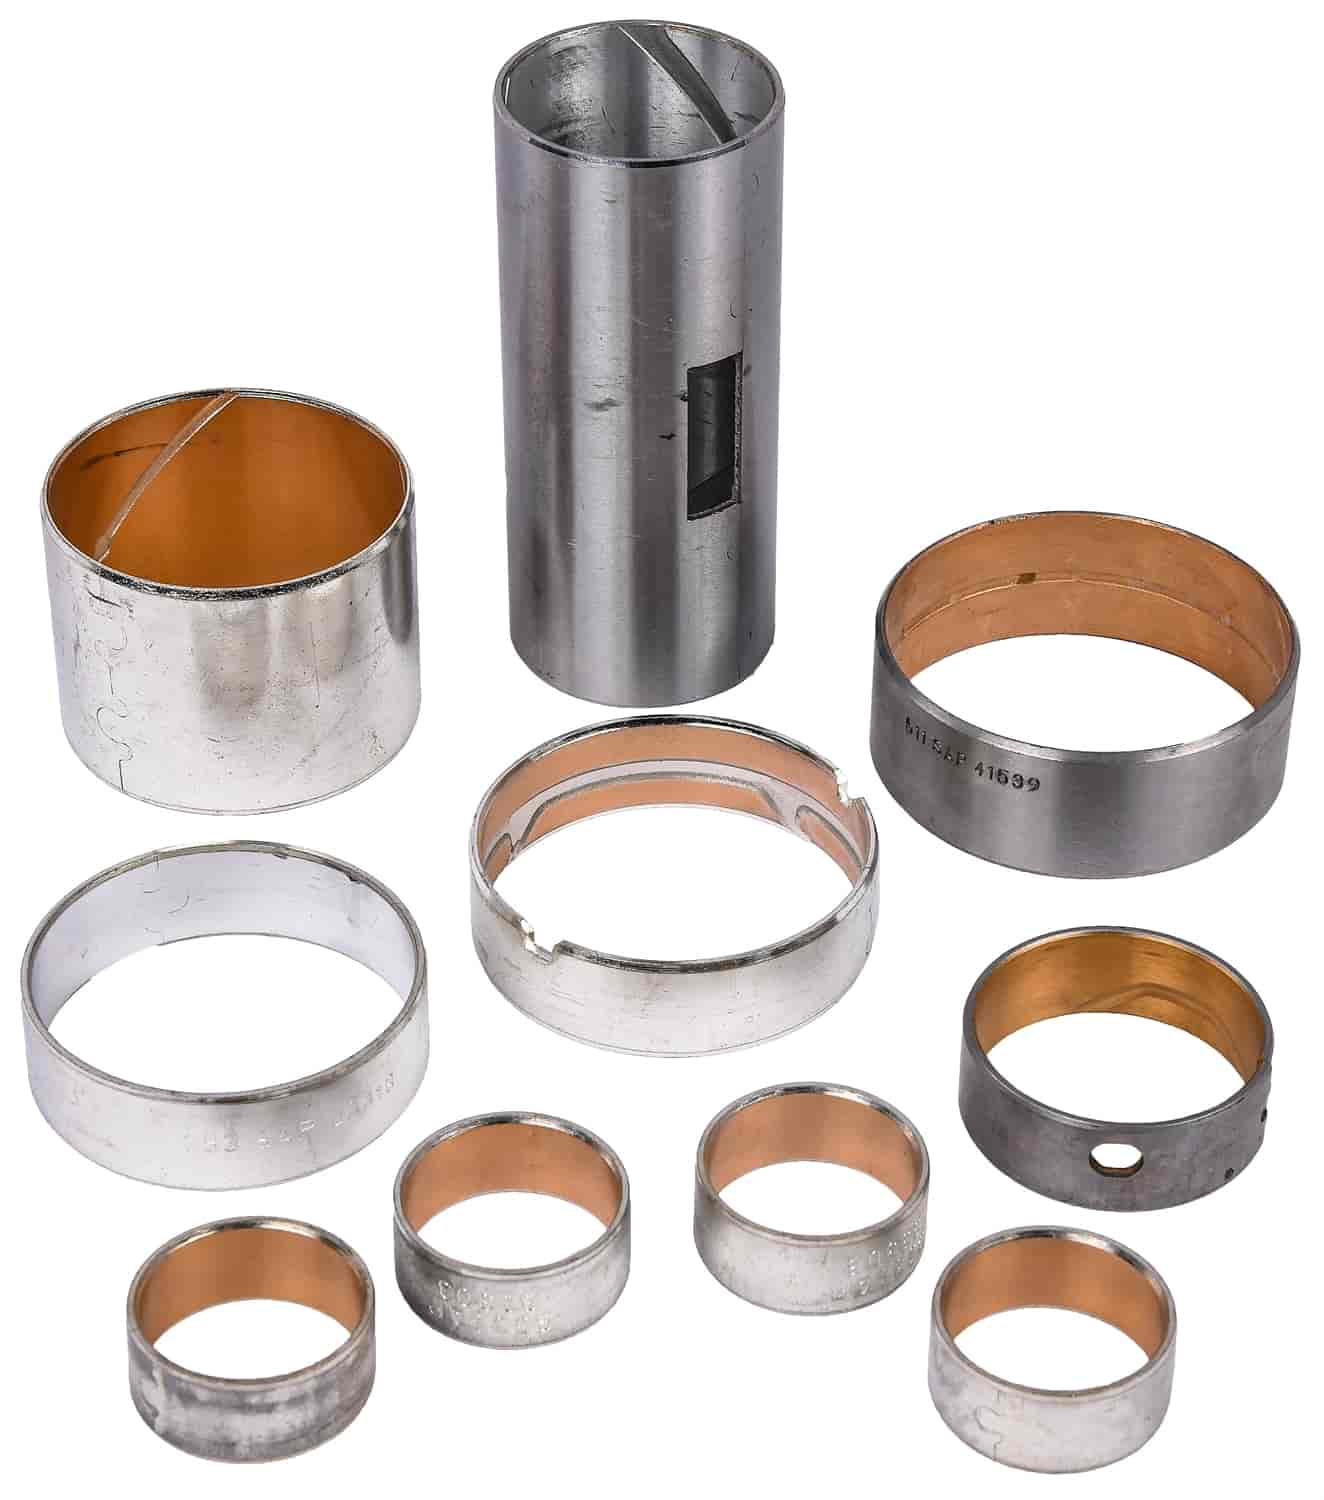 Automatic Transmission Bushings Kit for 1966-1991 GM TH400